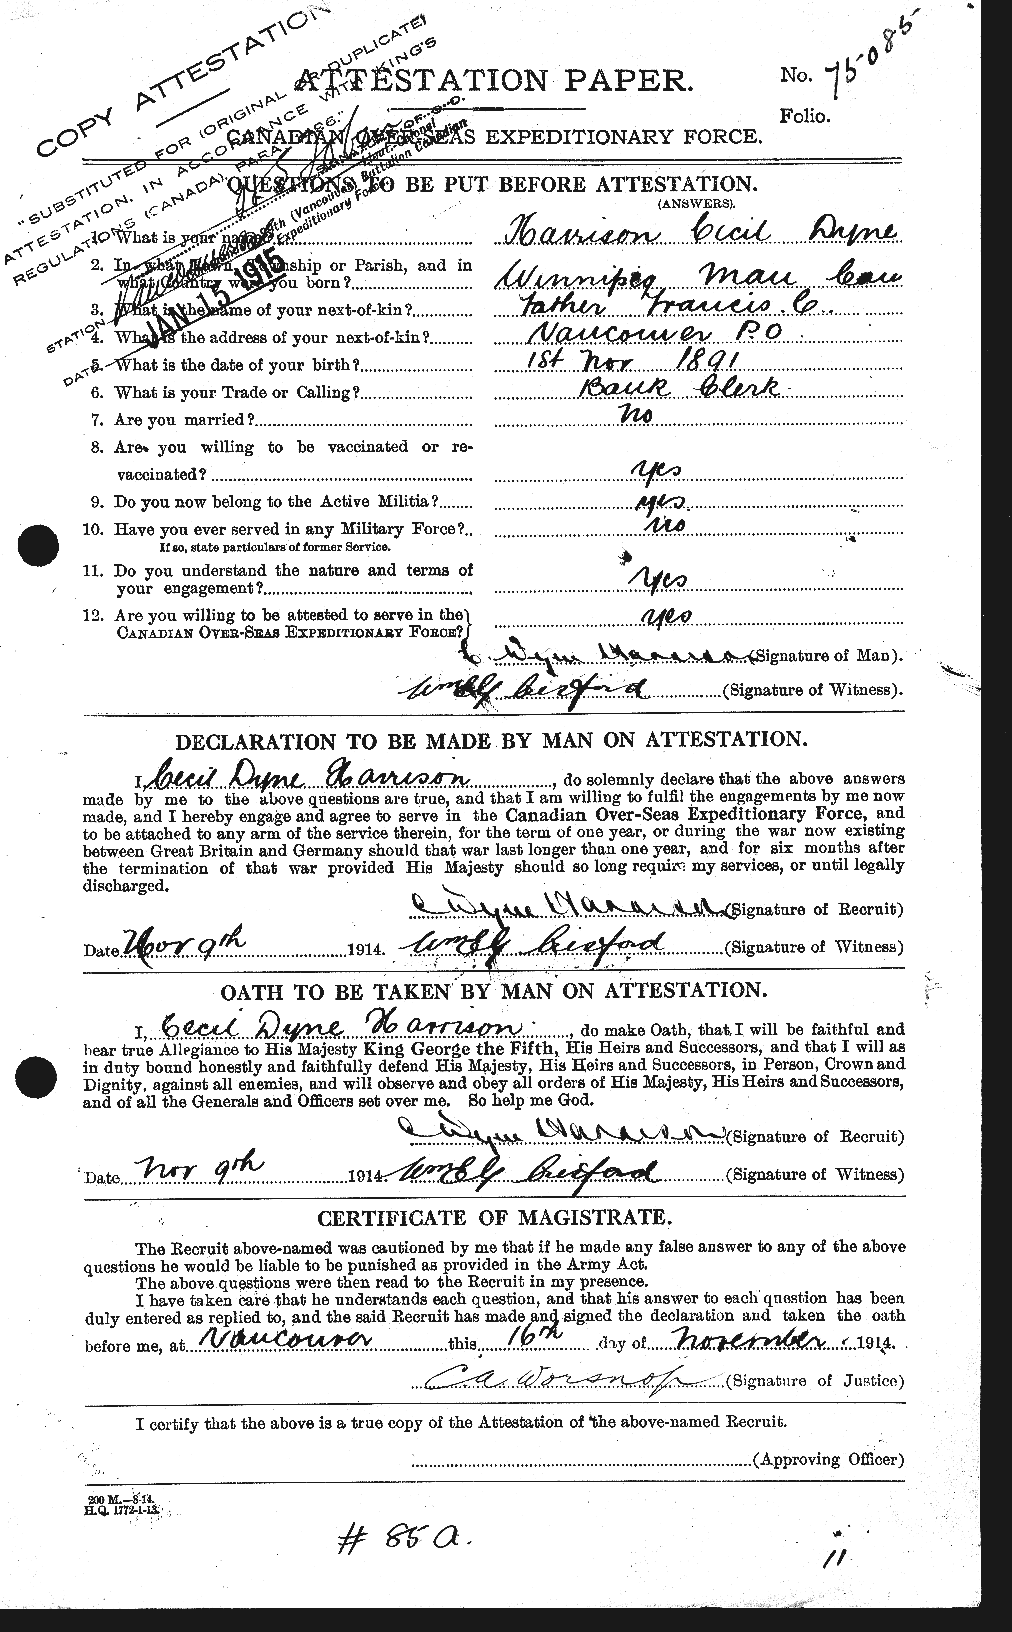 Personnel Records of the First World War - CEF 380260a